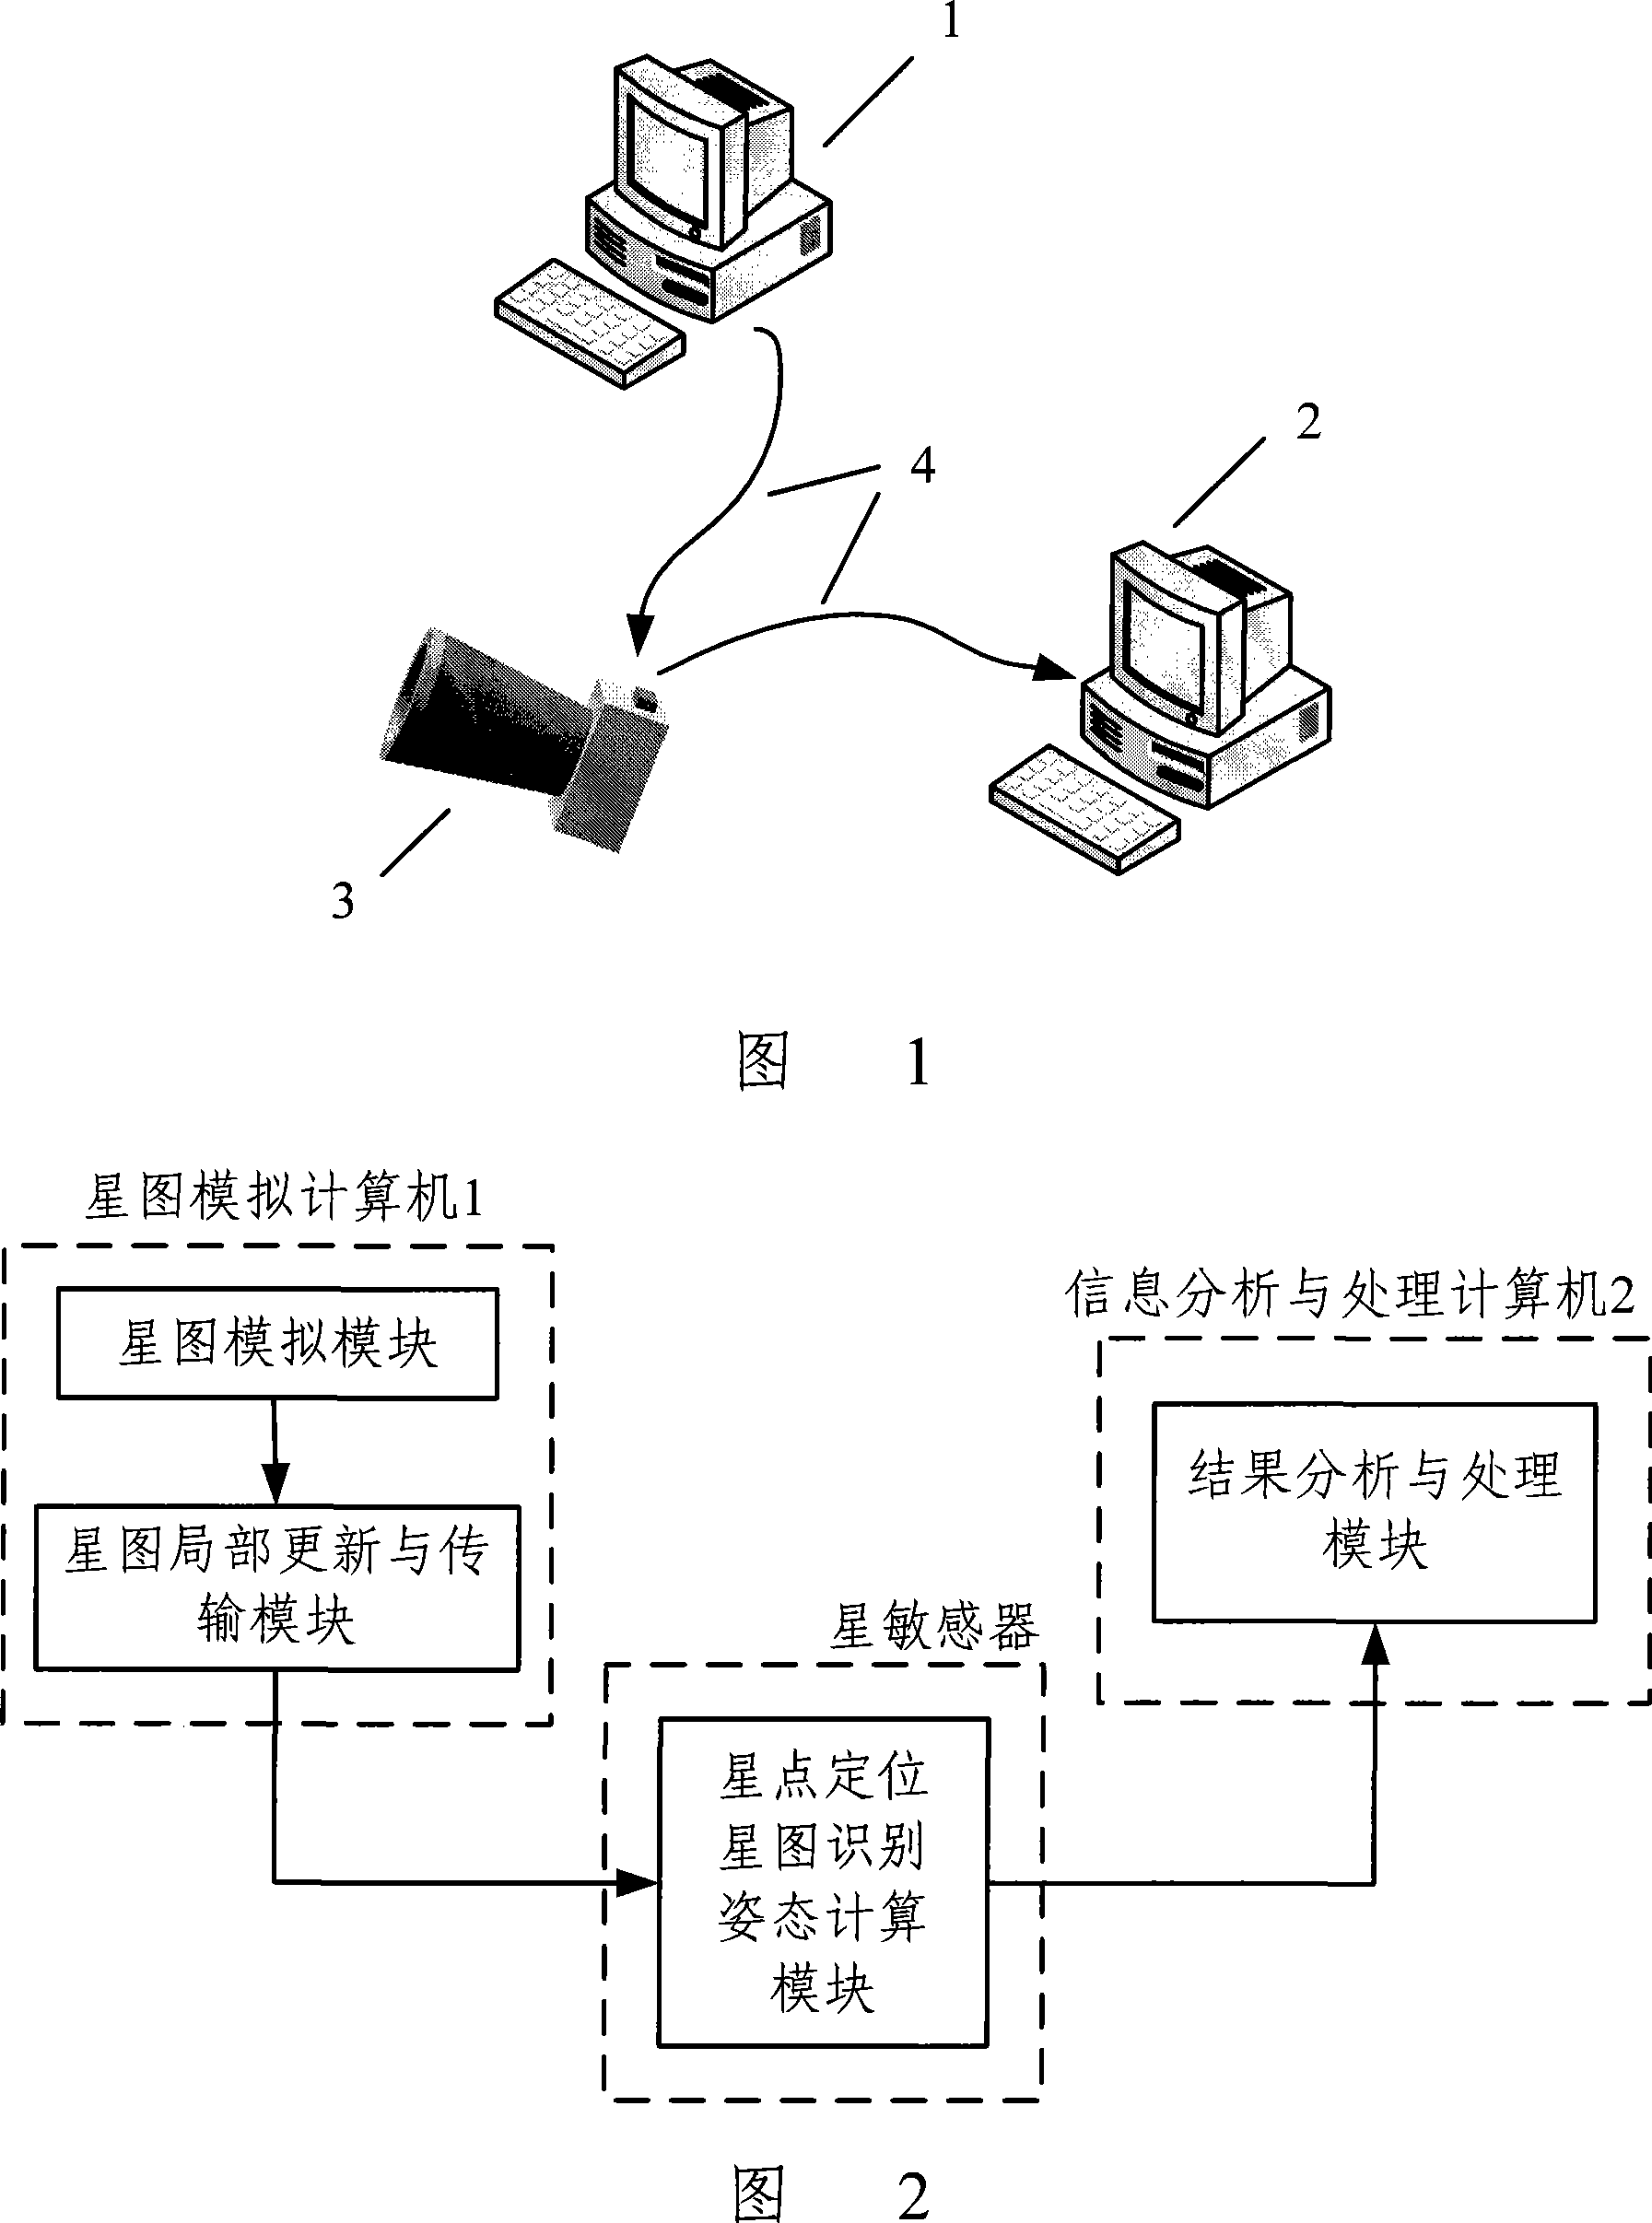 Method and apparatus for testing star sensor function based on electric injection star map